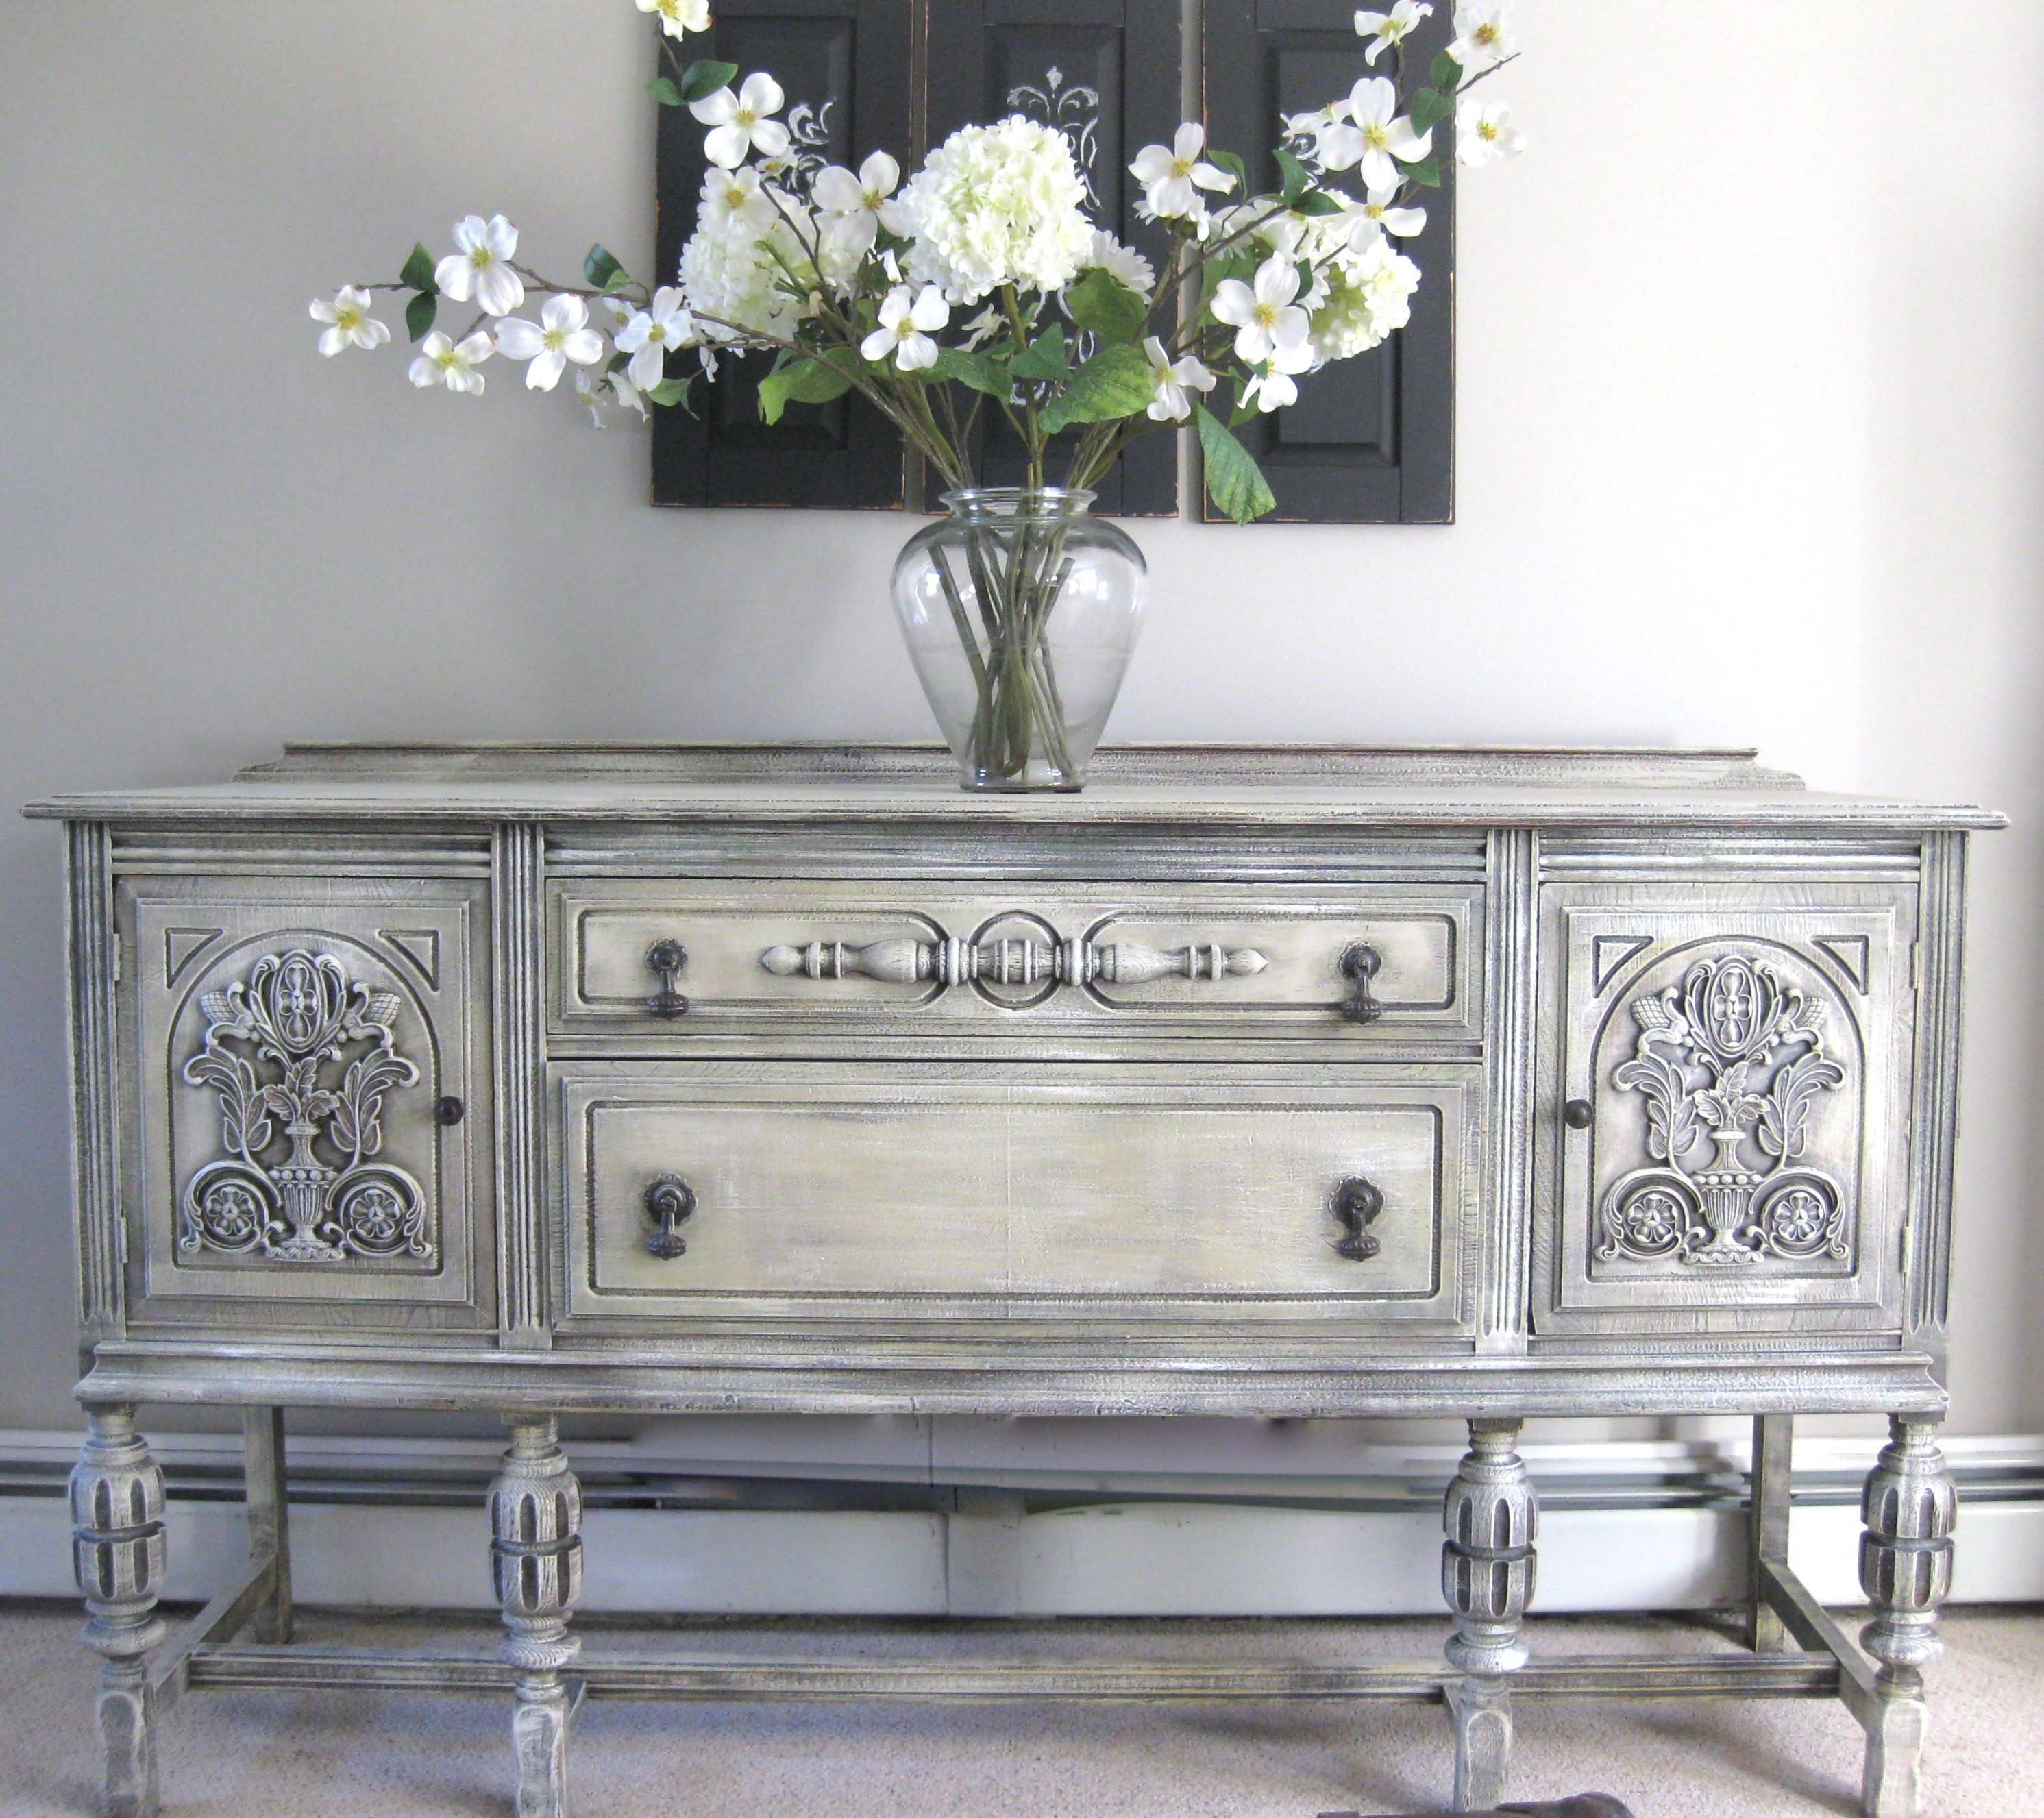 Antique Sideboard Buffet Painted With Annie Sloan Chalk Paint ..